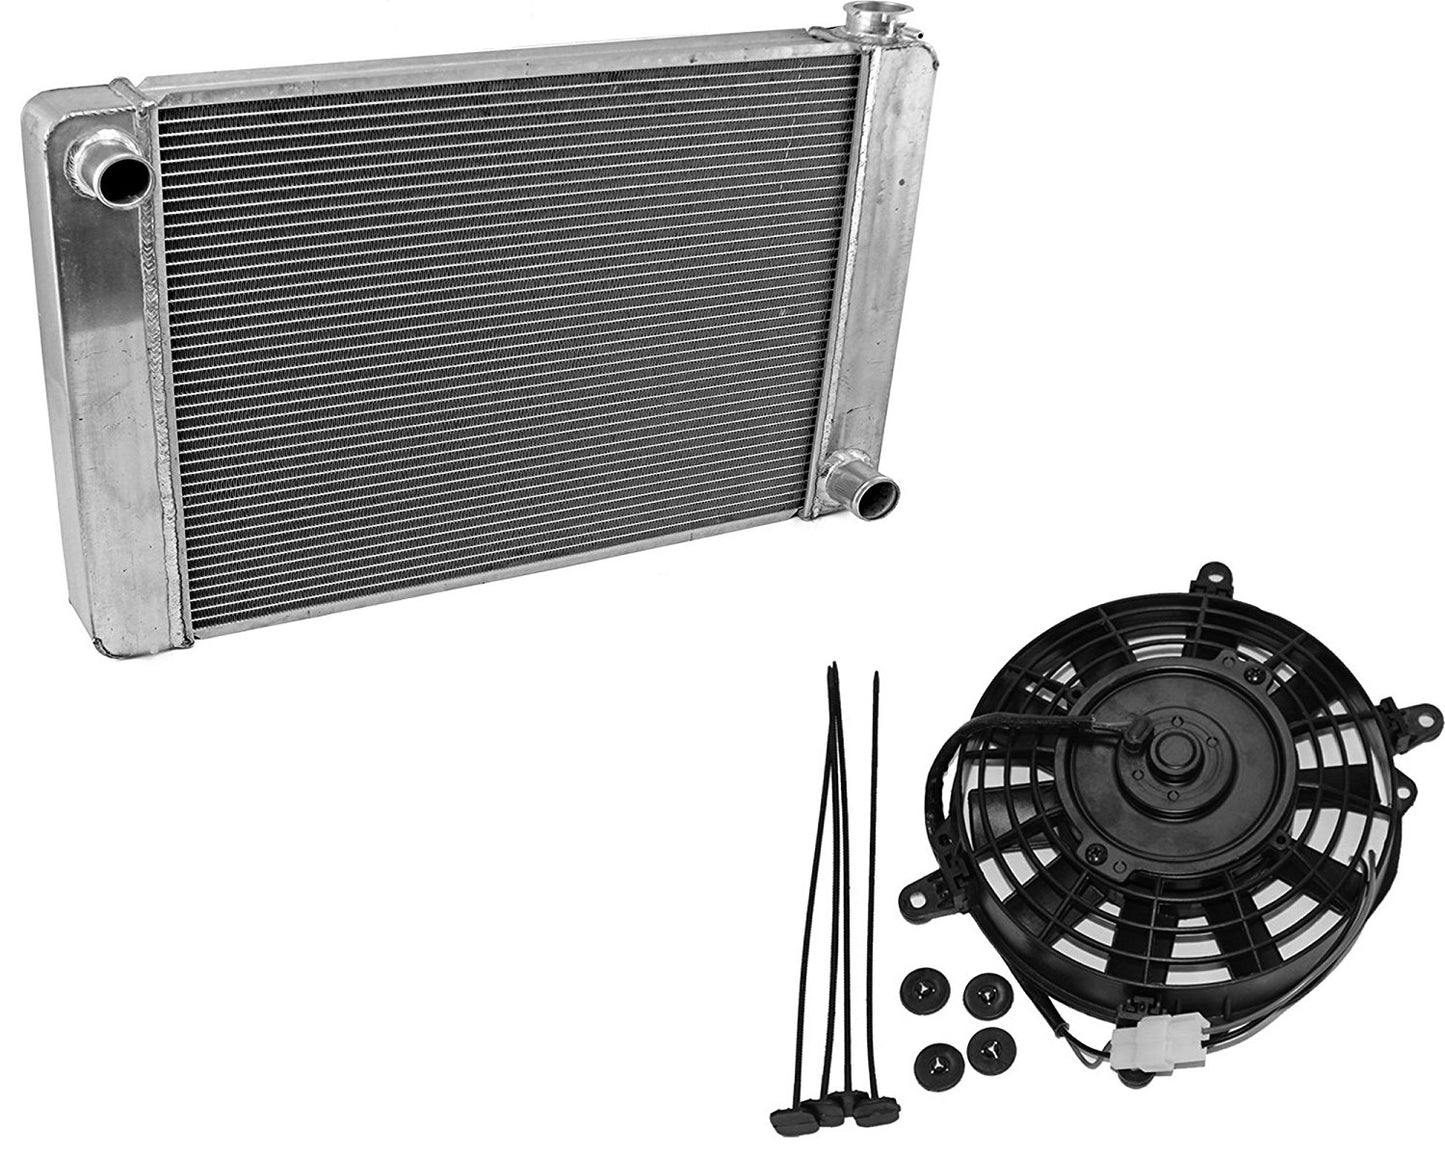 For SBC BBC Chevy GM Fabricated Aluminum Radiator 22" x 19" x3" & 8" Staight Blade Electric Radator Cooling Fan